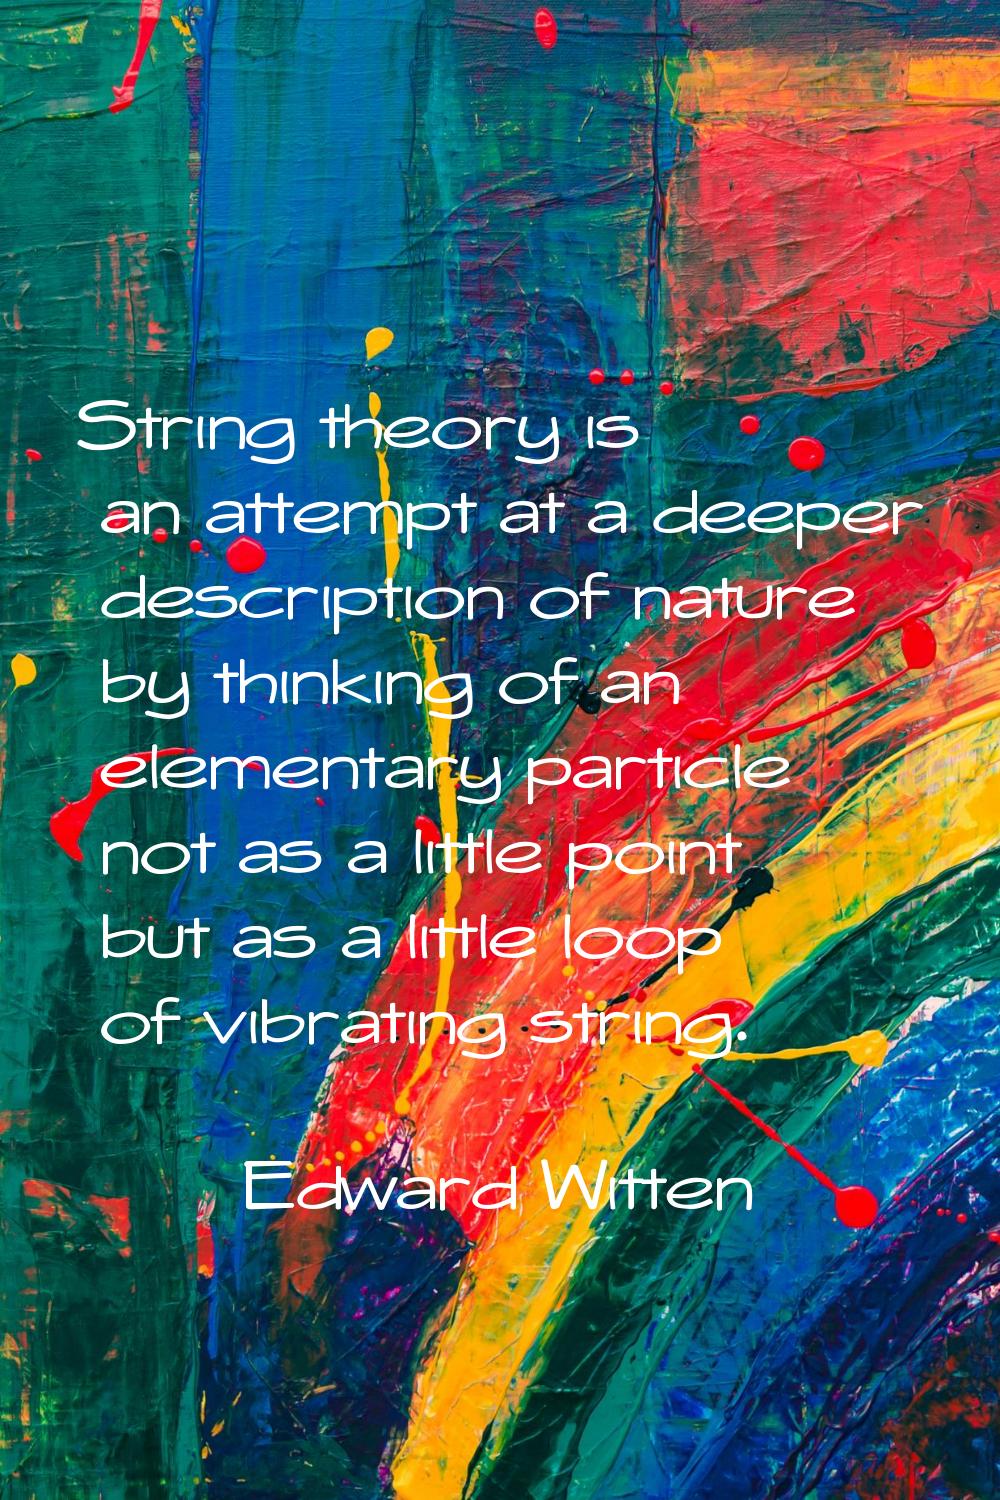 String theory is an attempt at a deeper description of nature by thinking of an elementary particle